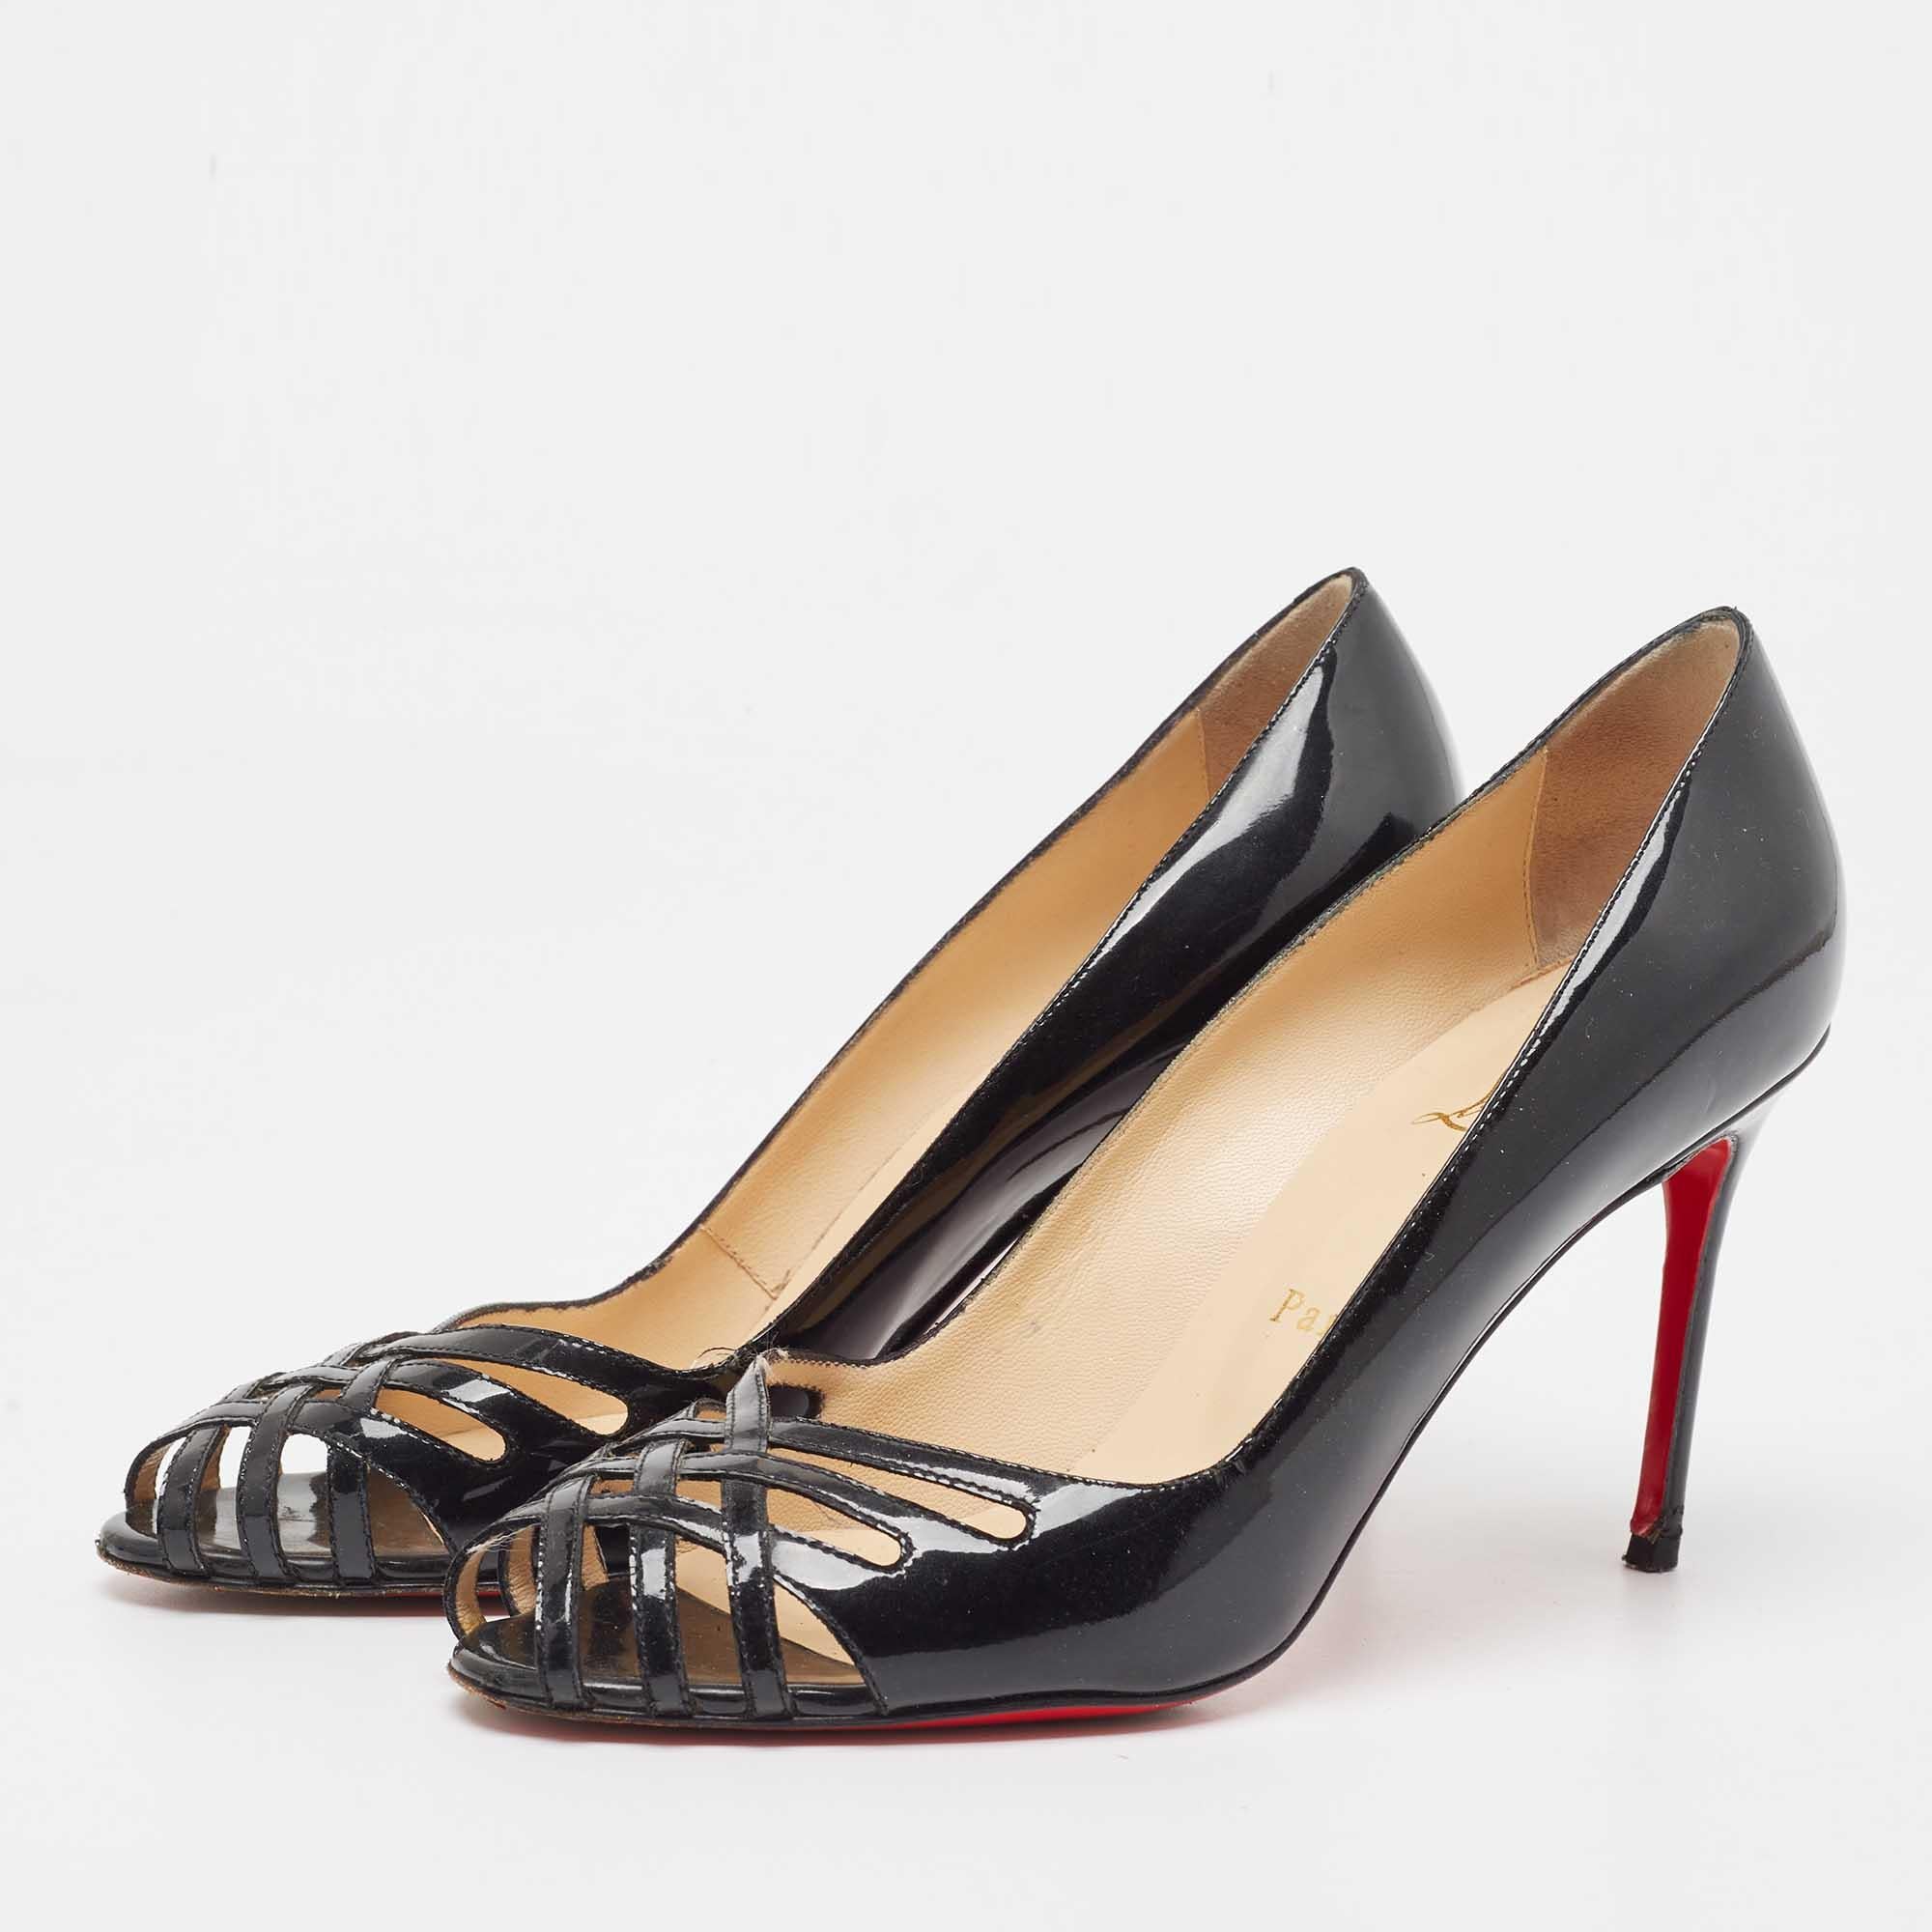 Wonderfully crafted shoes added with notable elements to fit well and pair perfectly with all your plans. Make these Christian Louboutin black pumps yours today!

